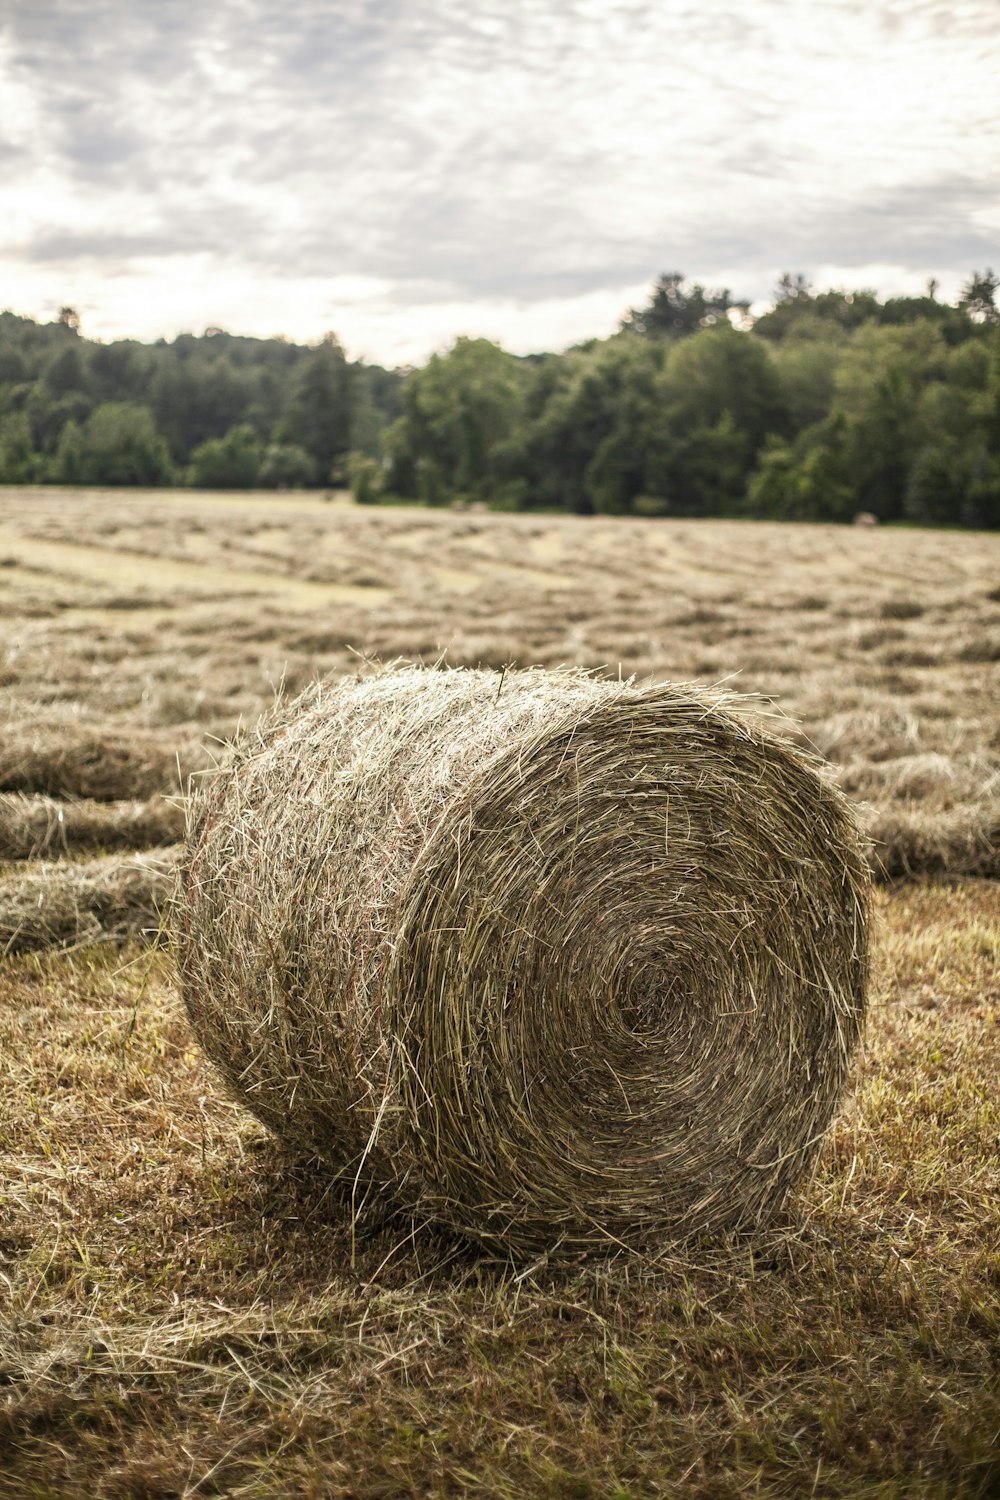 a bale of hay in a field with trees in the background